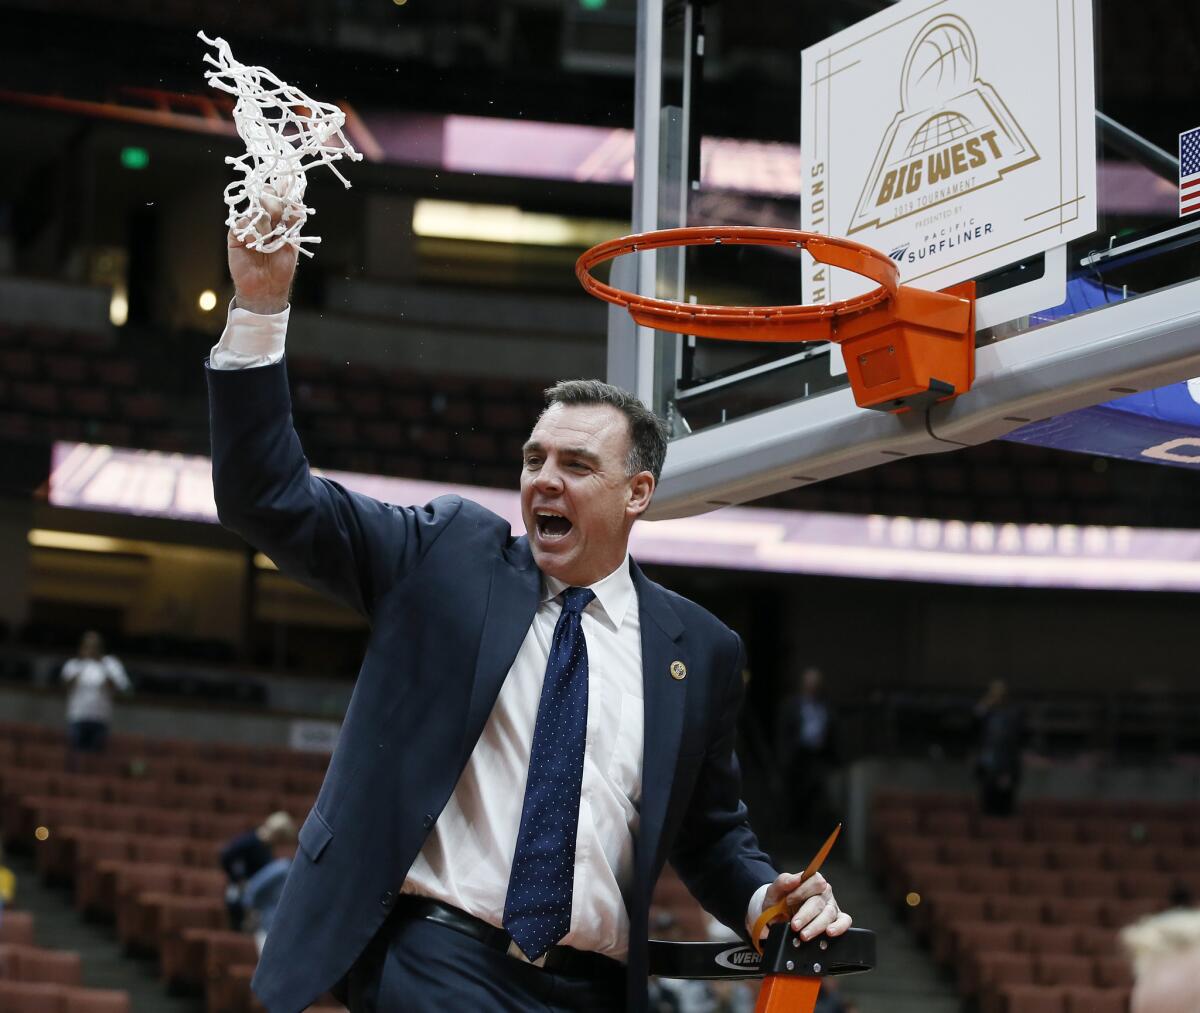 UC Irvine coach Russell Turner celebrates after cutting down the net as his team beat Cal State Fullerton 94-64 for the Big West Conference Tournament title at Honda Center on March 16.